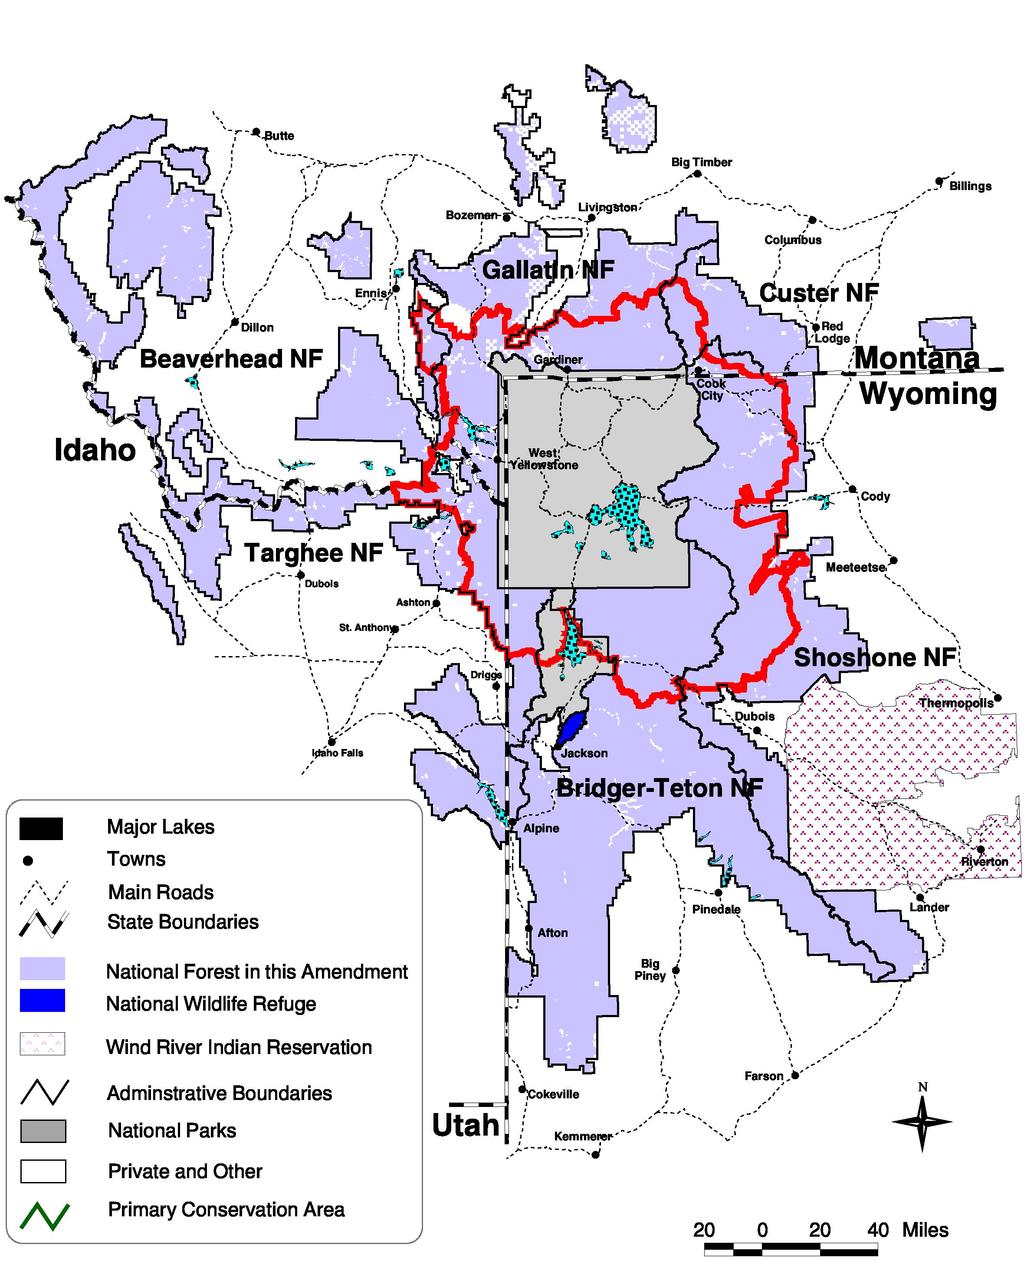 1983 Grizzly Bear recovery area (red)